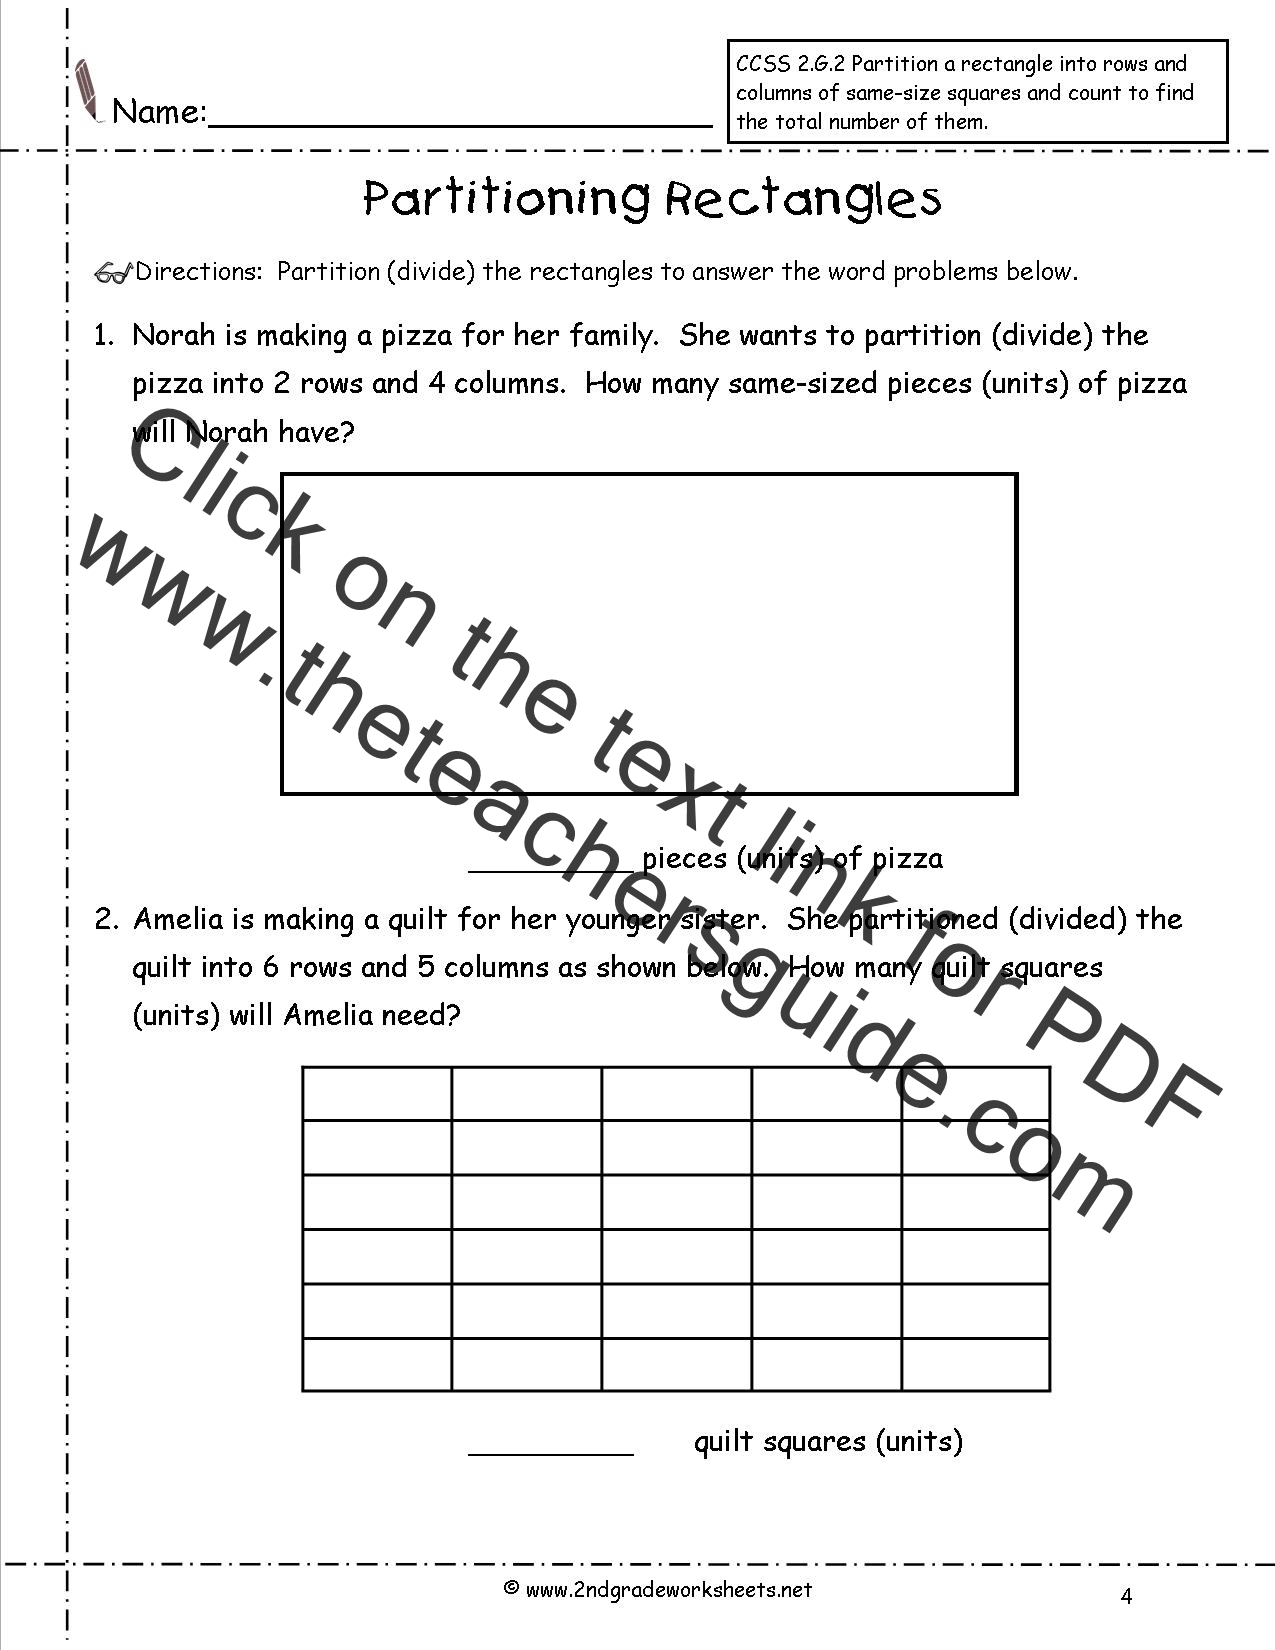 year-3-addition-worksheets-partitioning-partitioning-by-jreadshaw